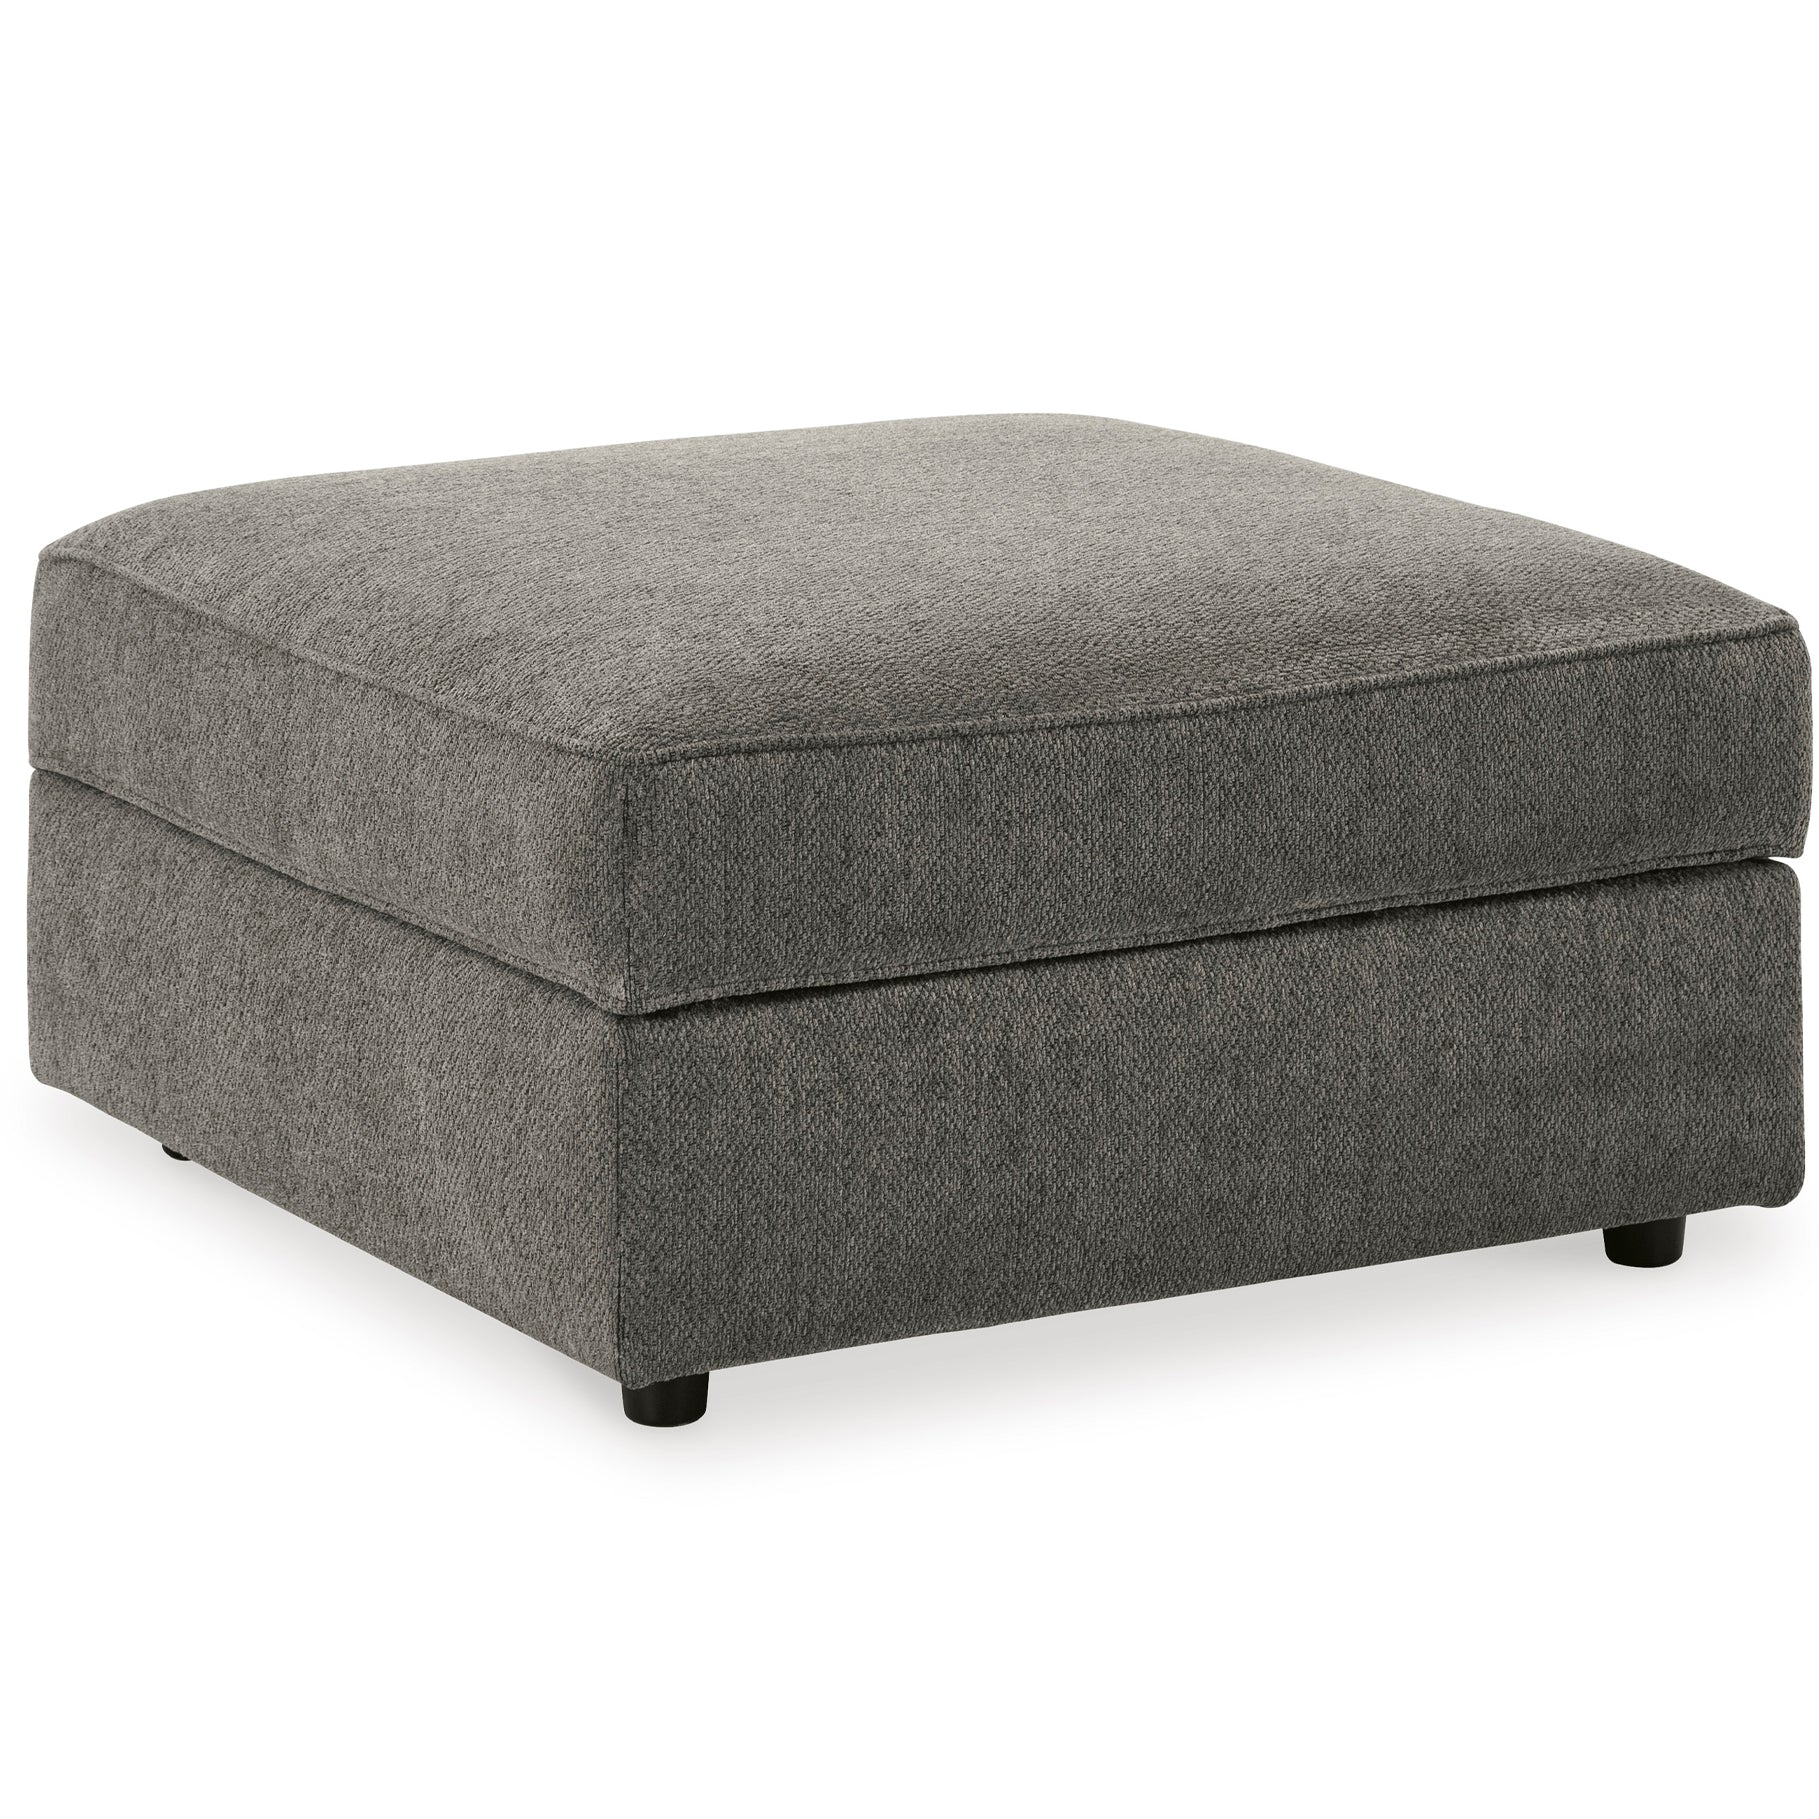 O'Phannon Ottoman With Storage in Putty Color